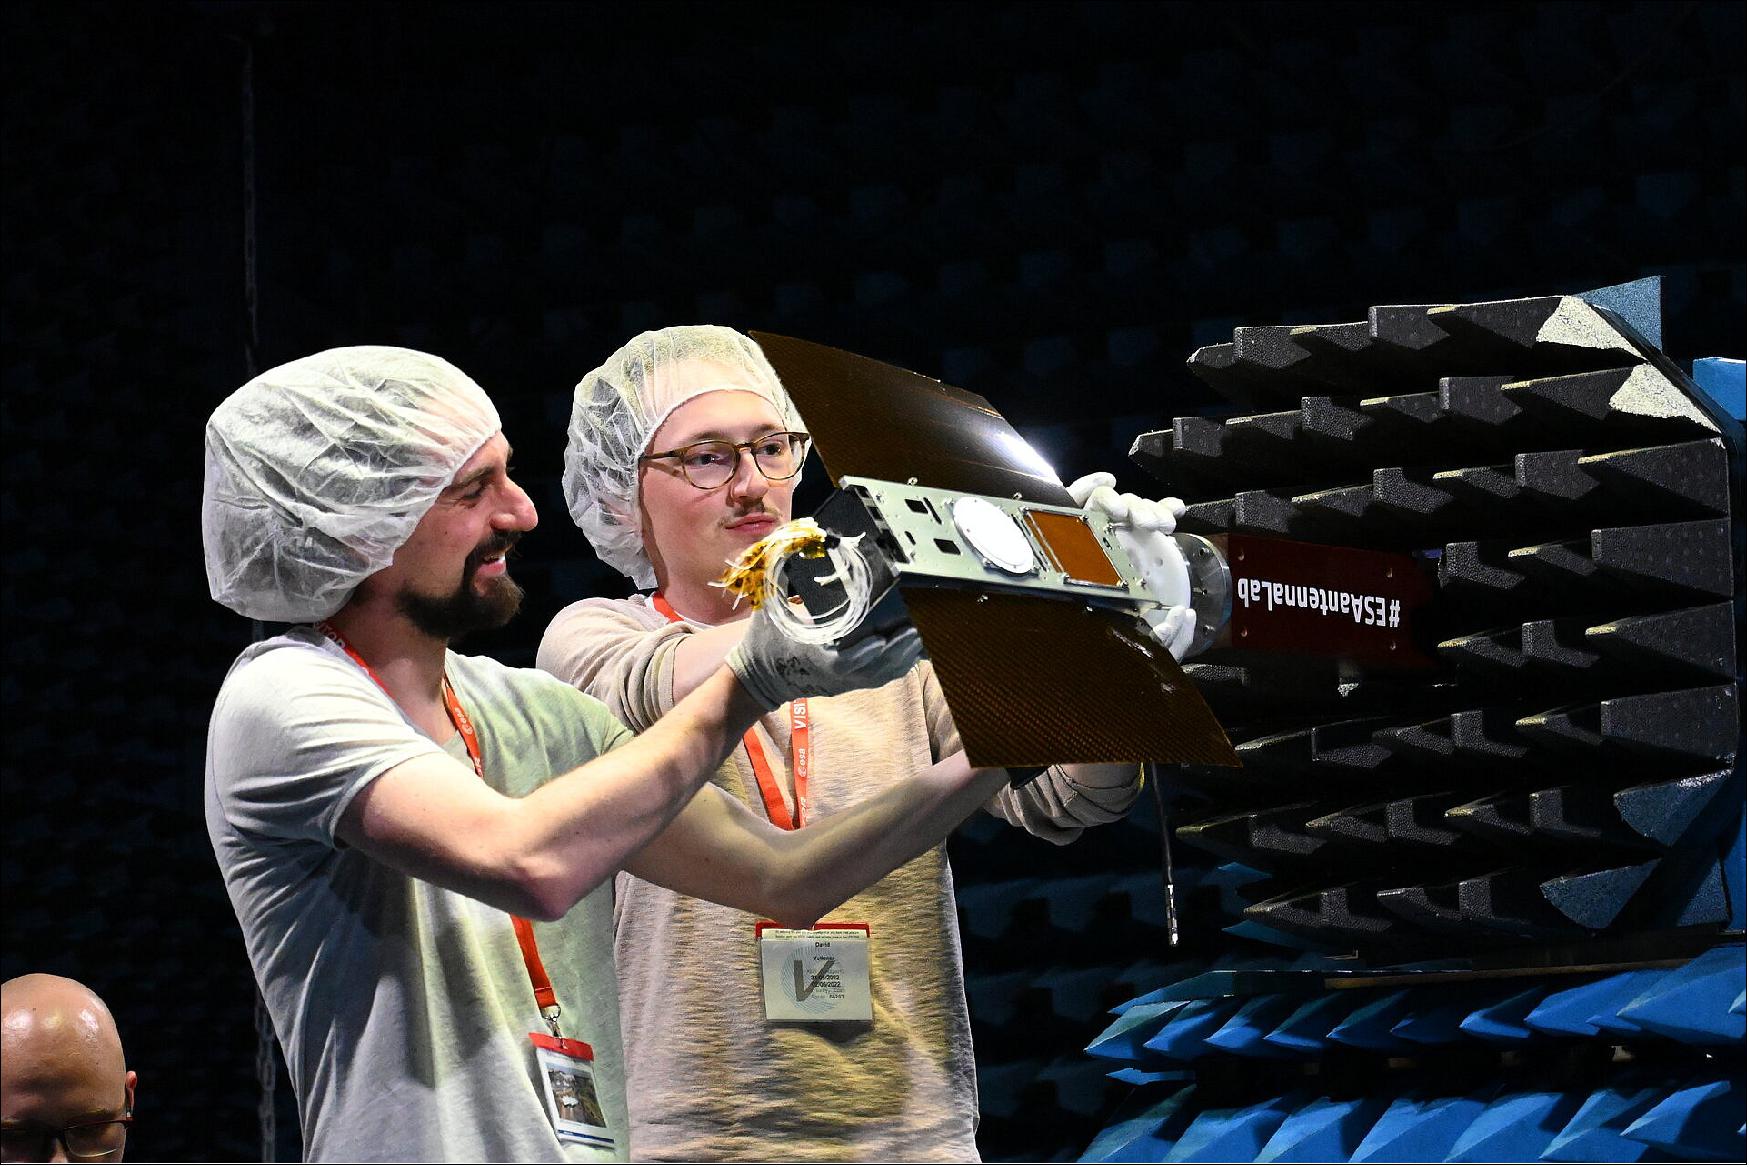 Figure 5: Students installing their CubeSat at the antenna test range (image credit: ESA)